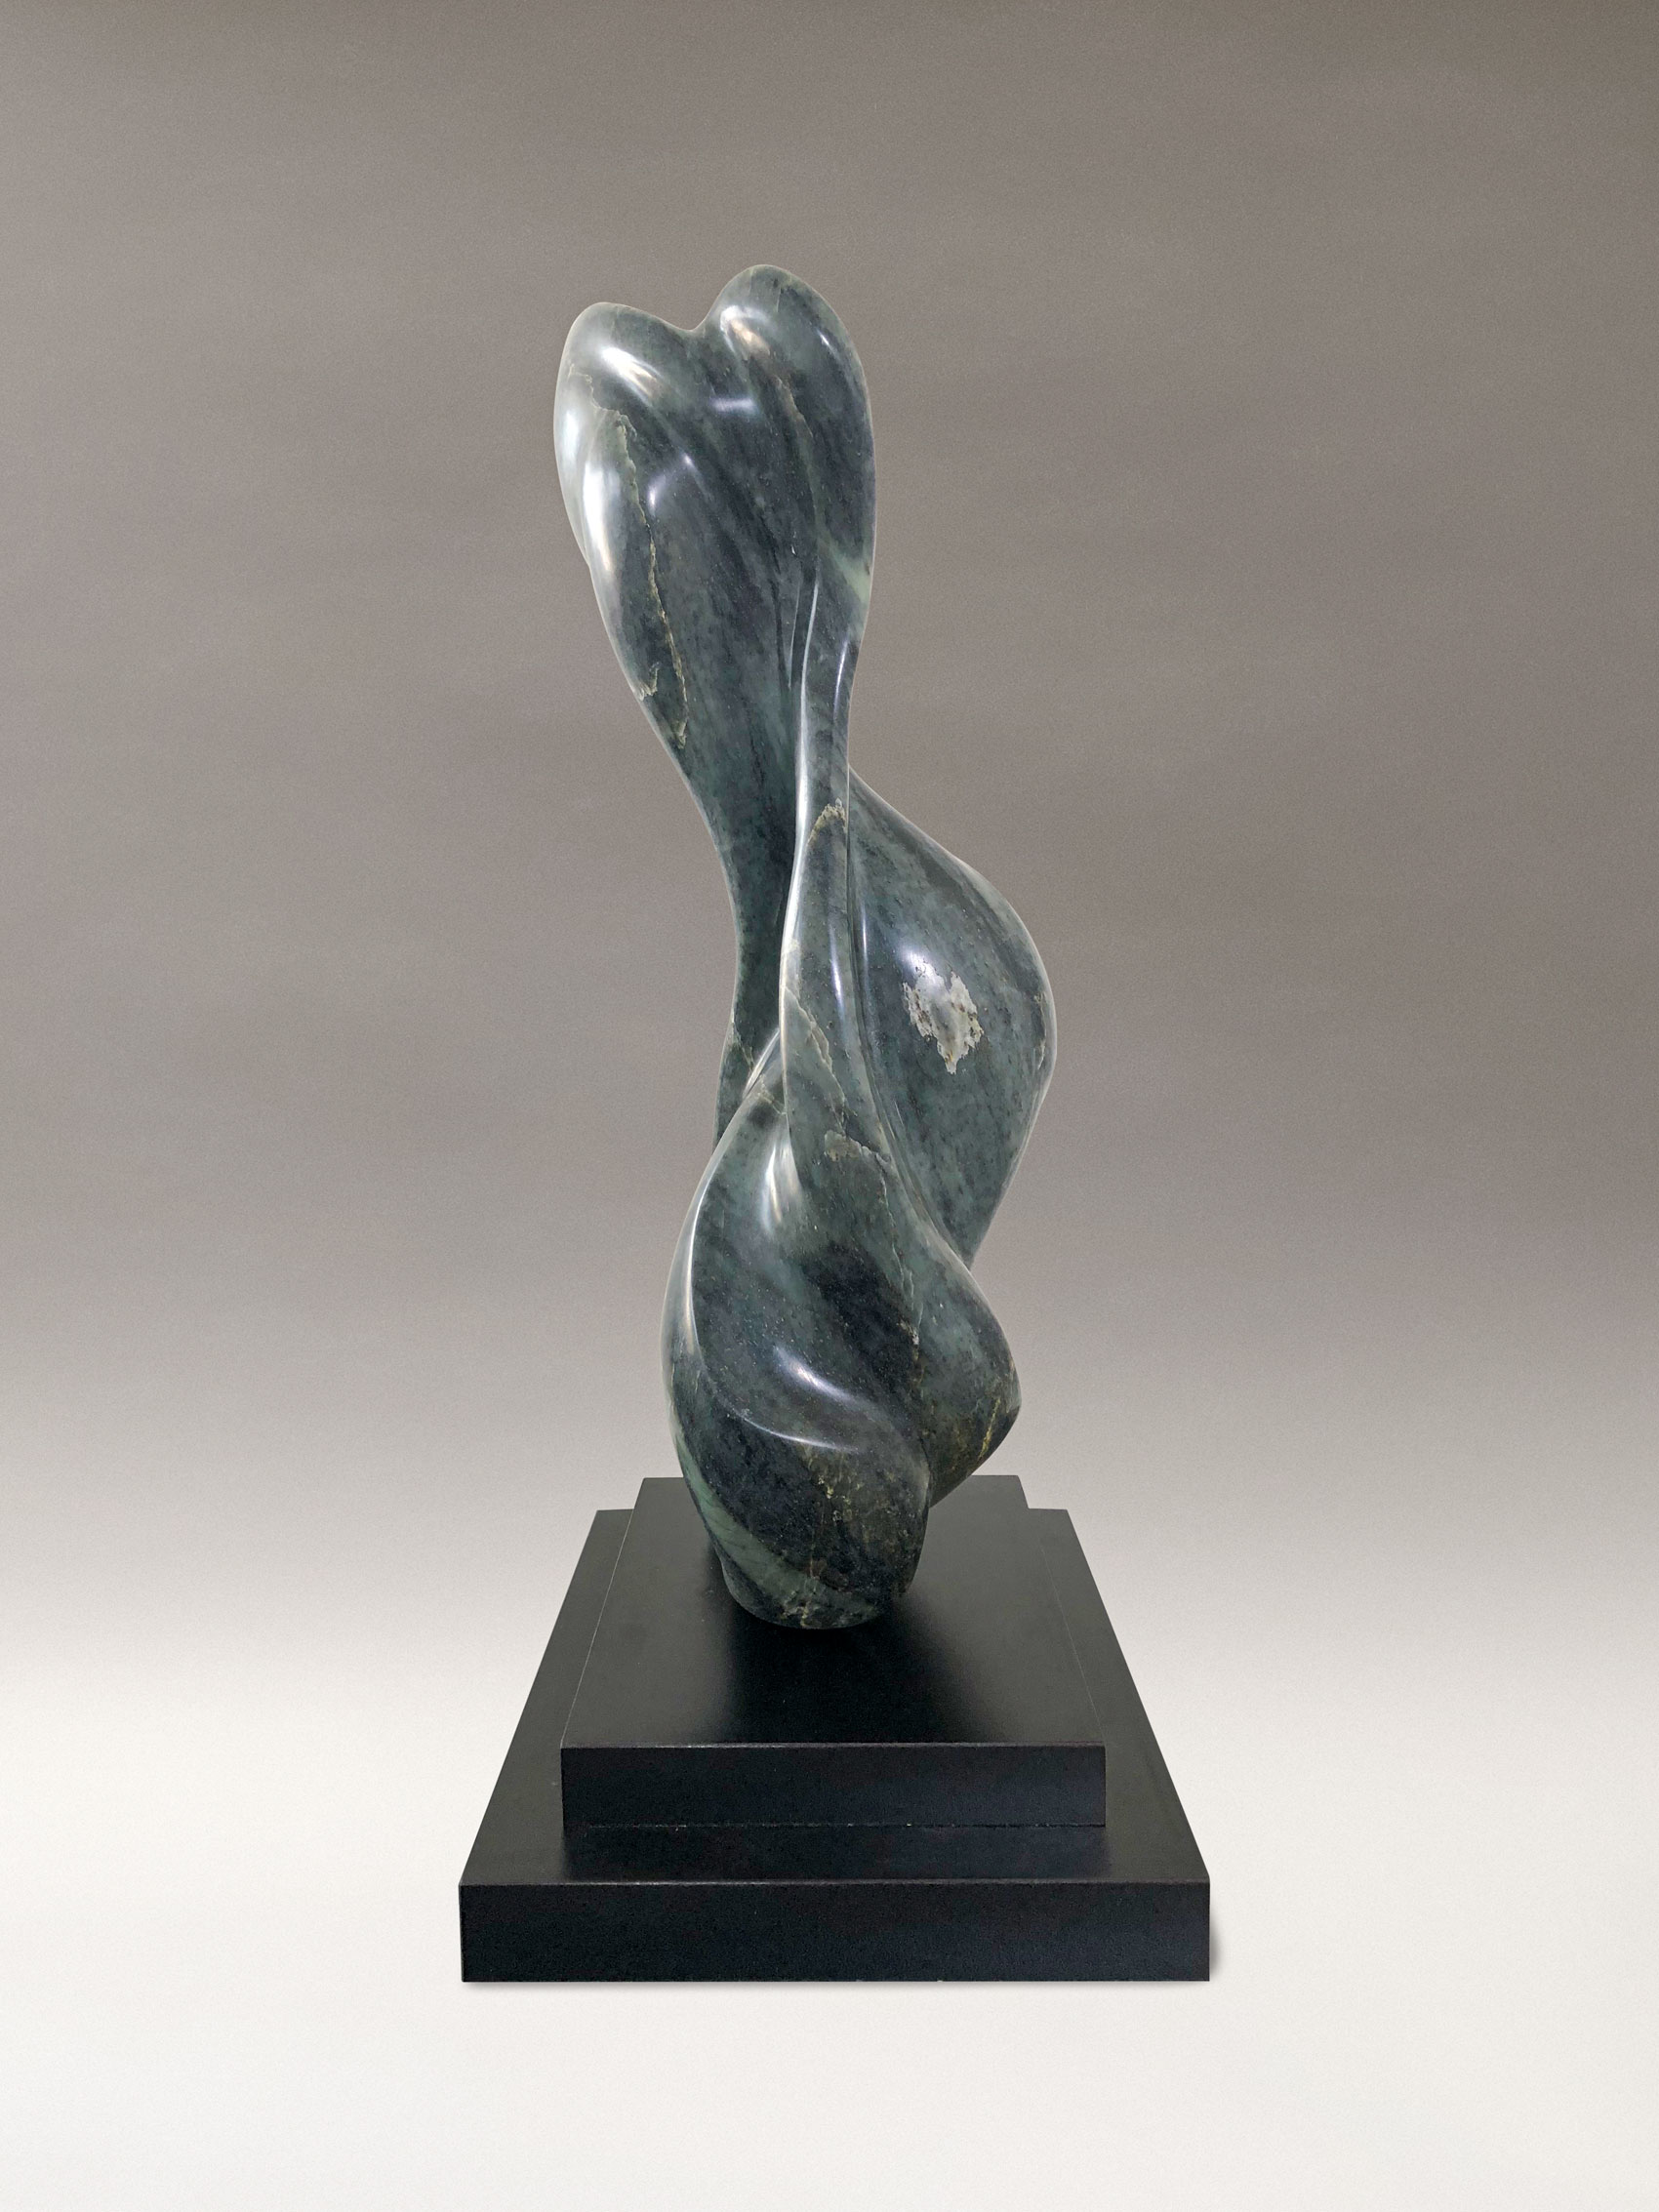 Abstract sculpture in Brazilian soapstone